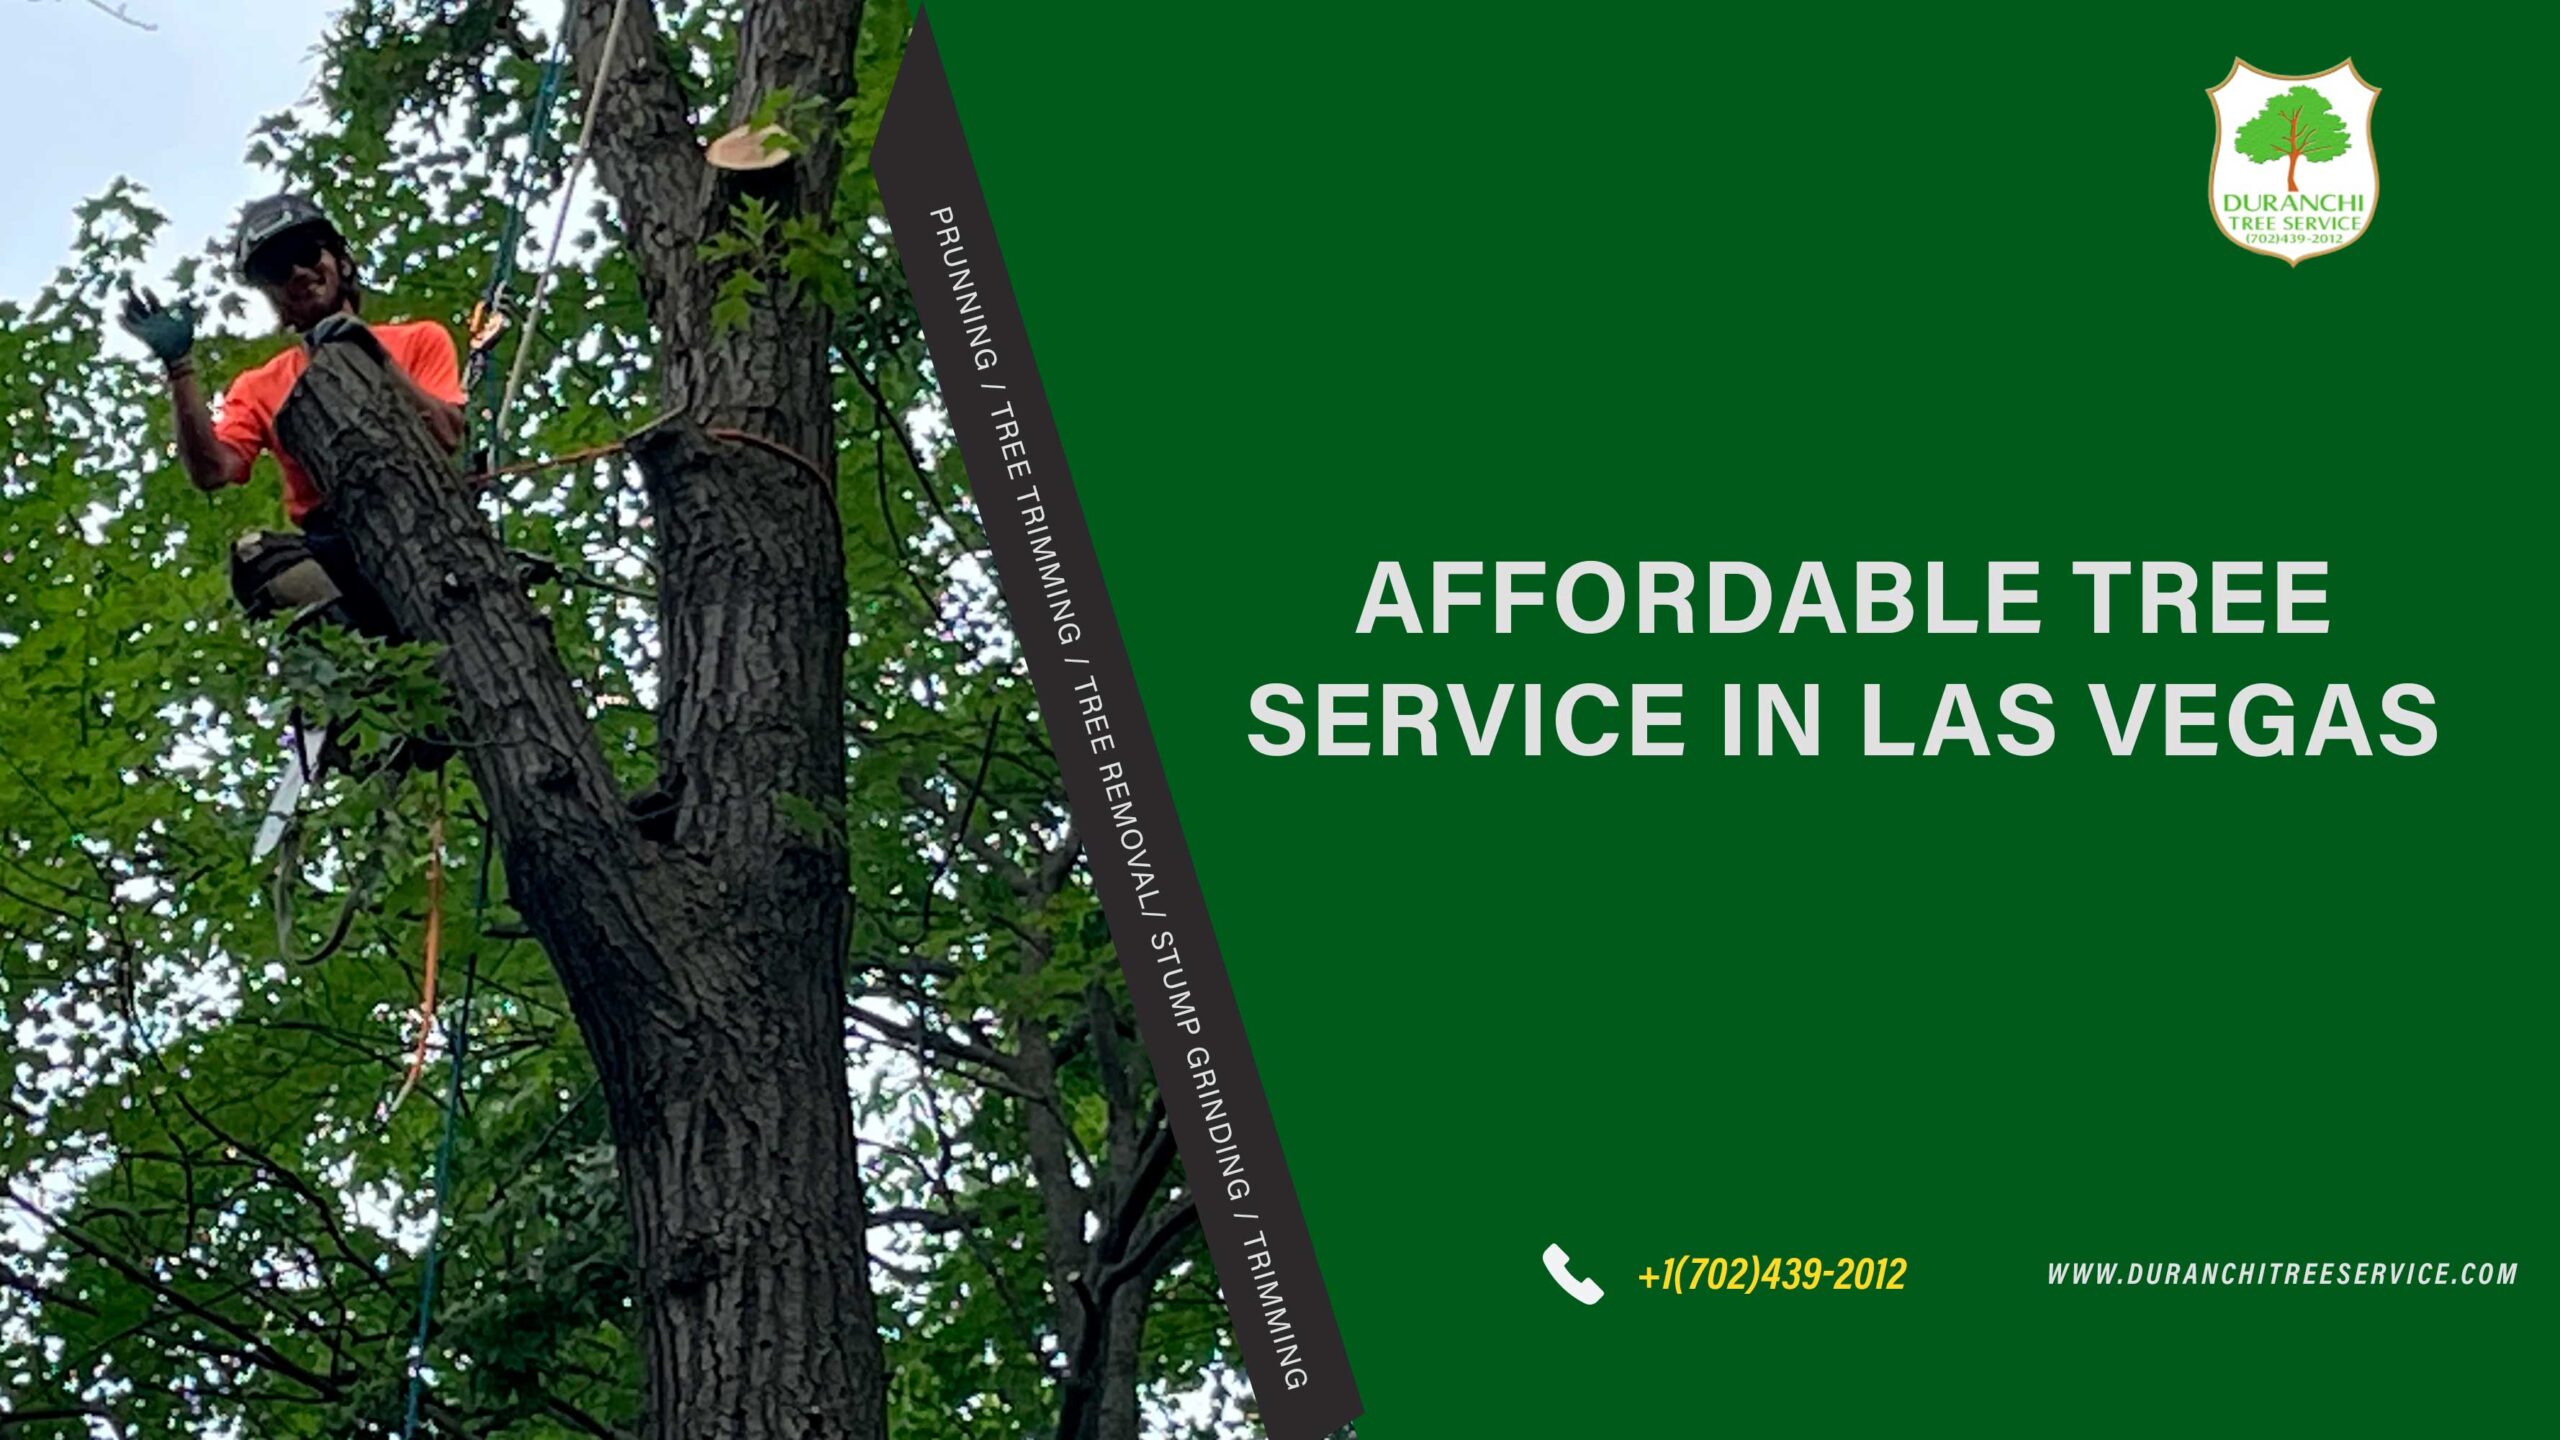 Affordable Tree Service in Las Vegas